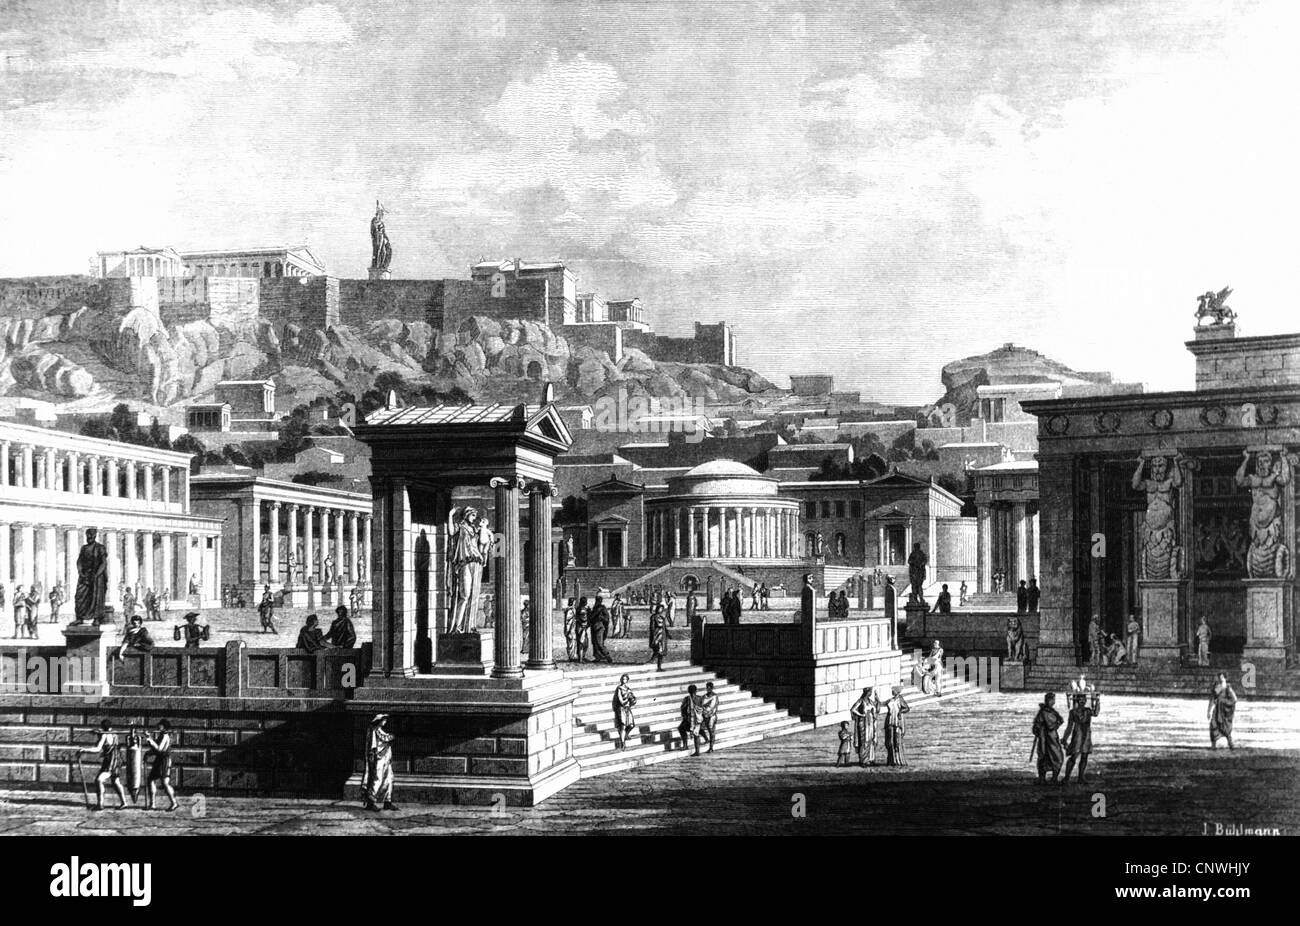 geography / travel, Greece, Athens, agora, view, 5th century BC, reconstruction, wood engraving after drawing by Joseph Buehlmann, late 19th century, market, markets, marketplace, market-place, people, ancient world, ancient times, Hellenes, Hellenes, building, buildings, architecture, archeology, archaeology, Southeast Europe, the Balkans, Balkan Peninsula, historic, historical, ancient world, Additional-Rights-Clearences-Not Available Stock Photo